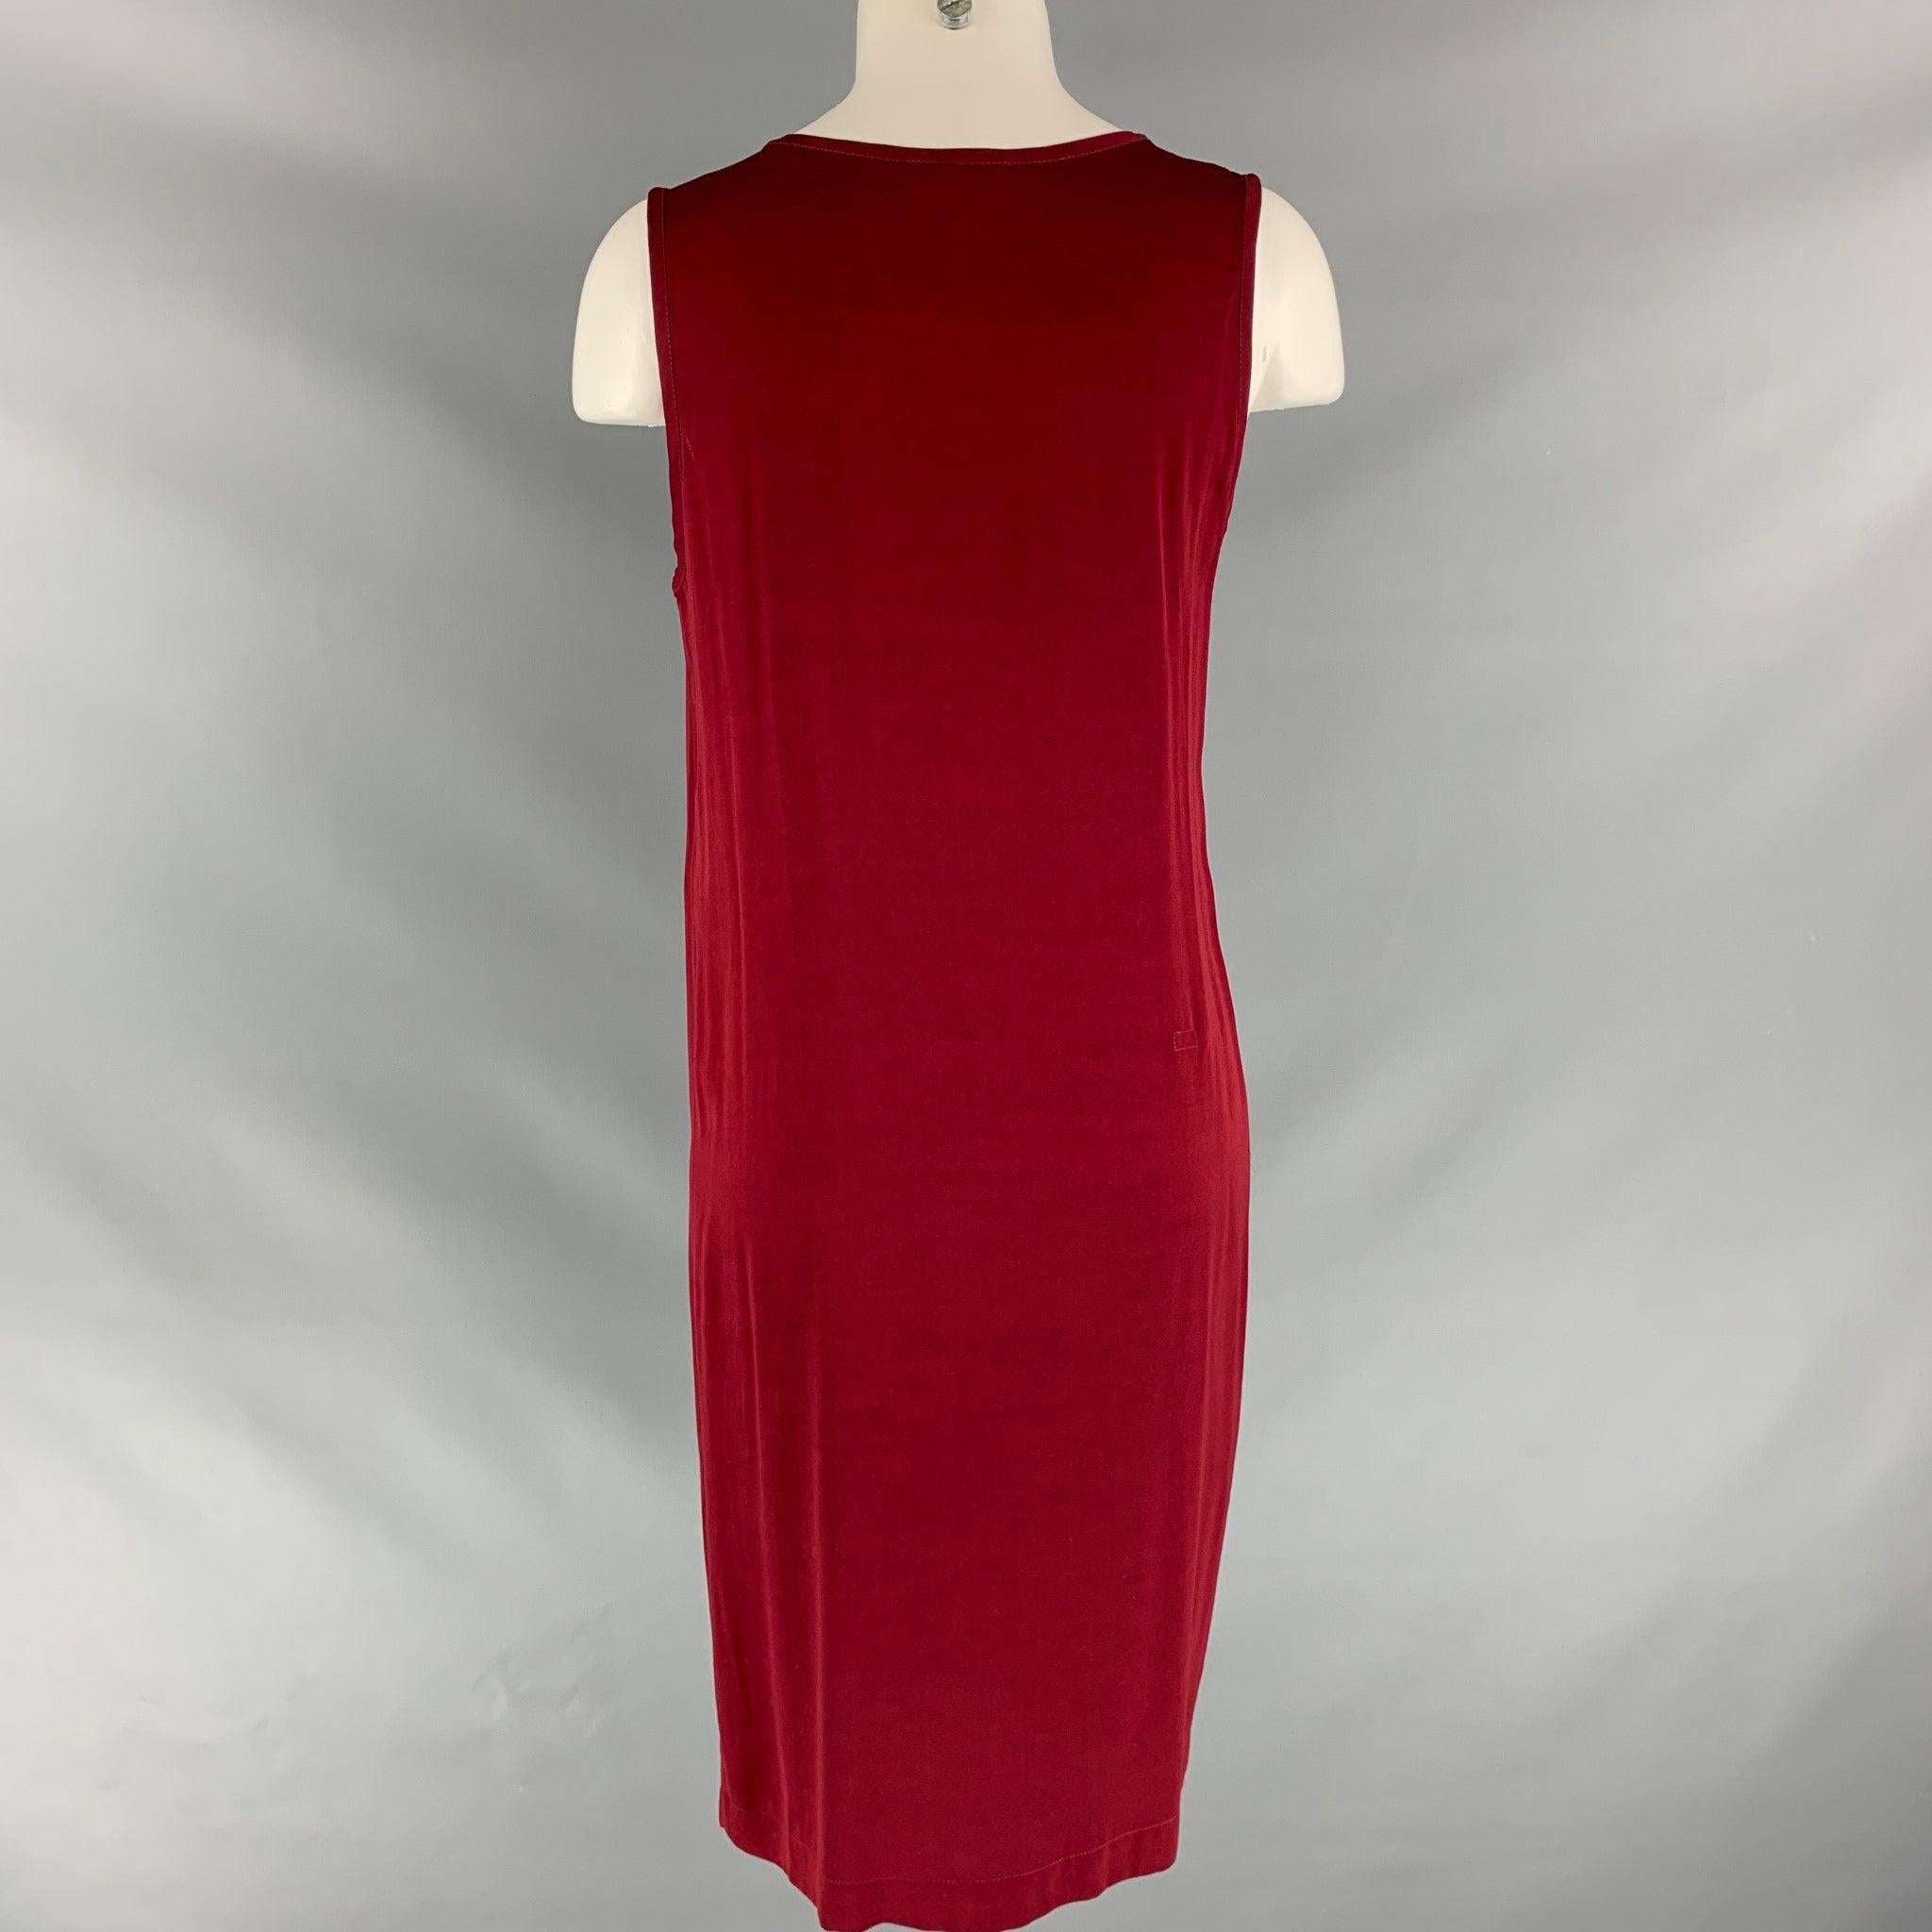 ANN DEMEULEMEESTER Size 4 Burgundy Rayon Solid Dress In Good Condition For Sale In San Francisco, CA